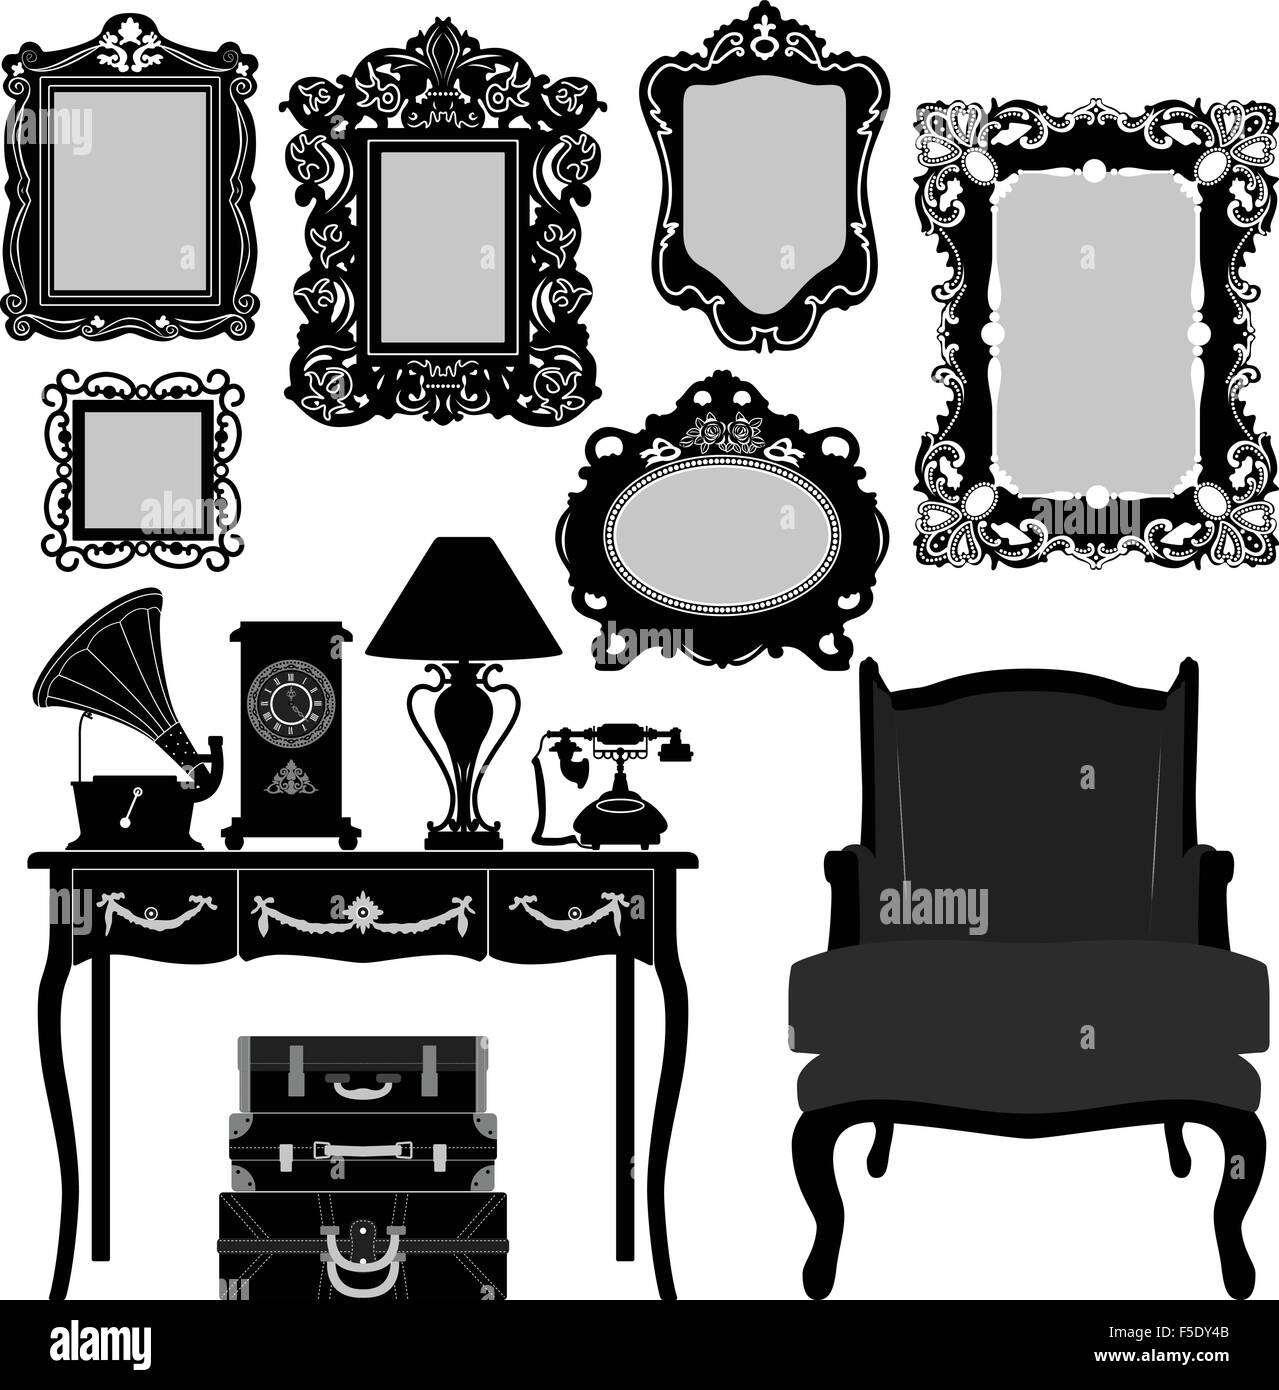 Antique Picture Frame Ornate Vintage Retro Museum Object Furniture Stock Vector